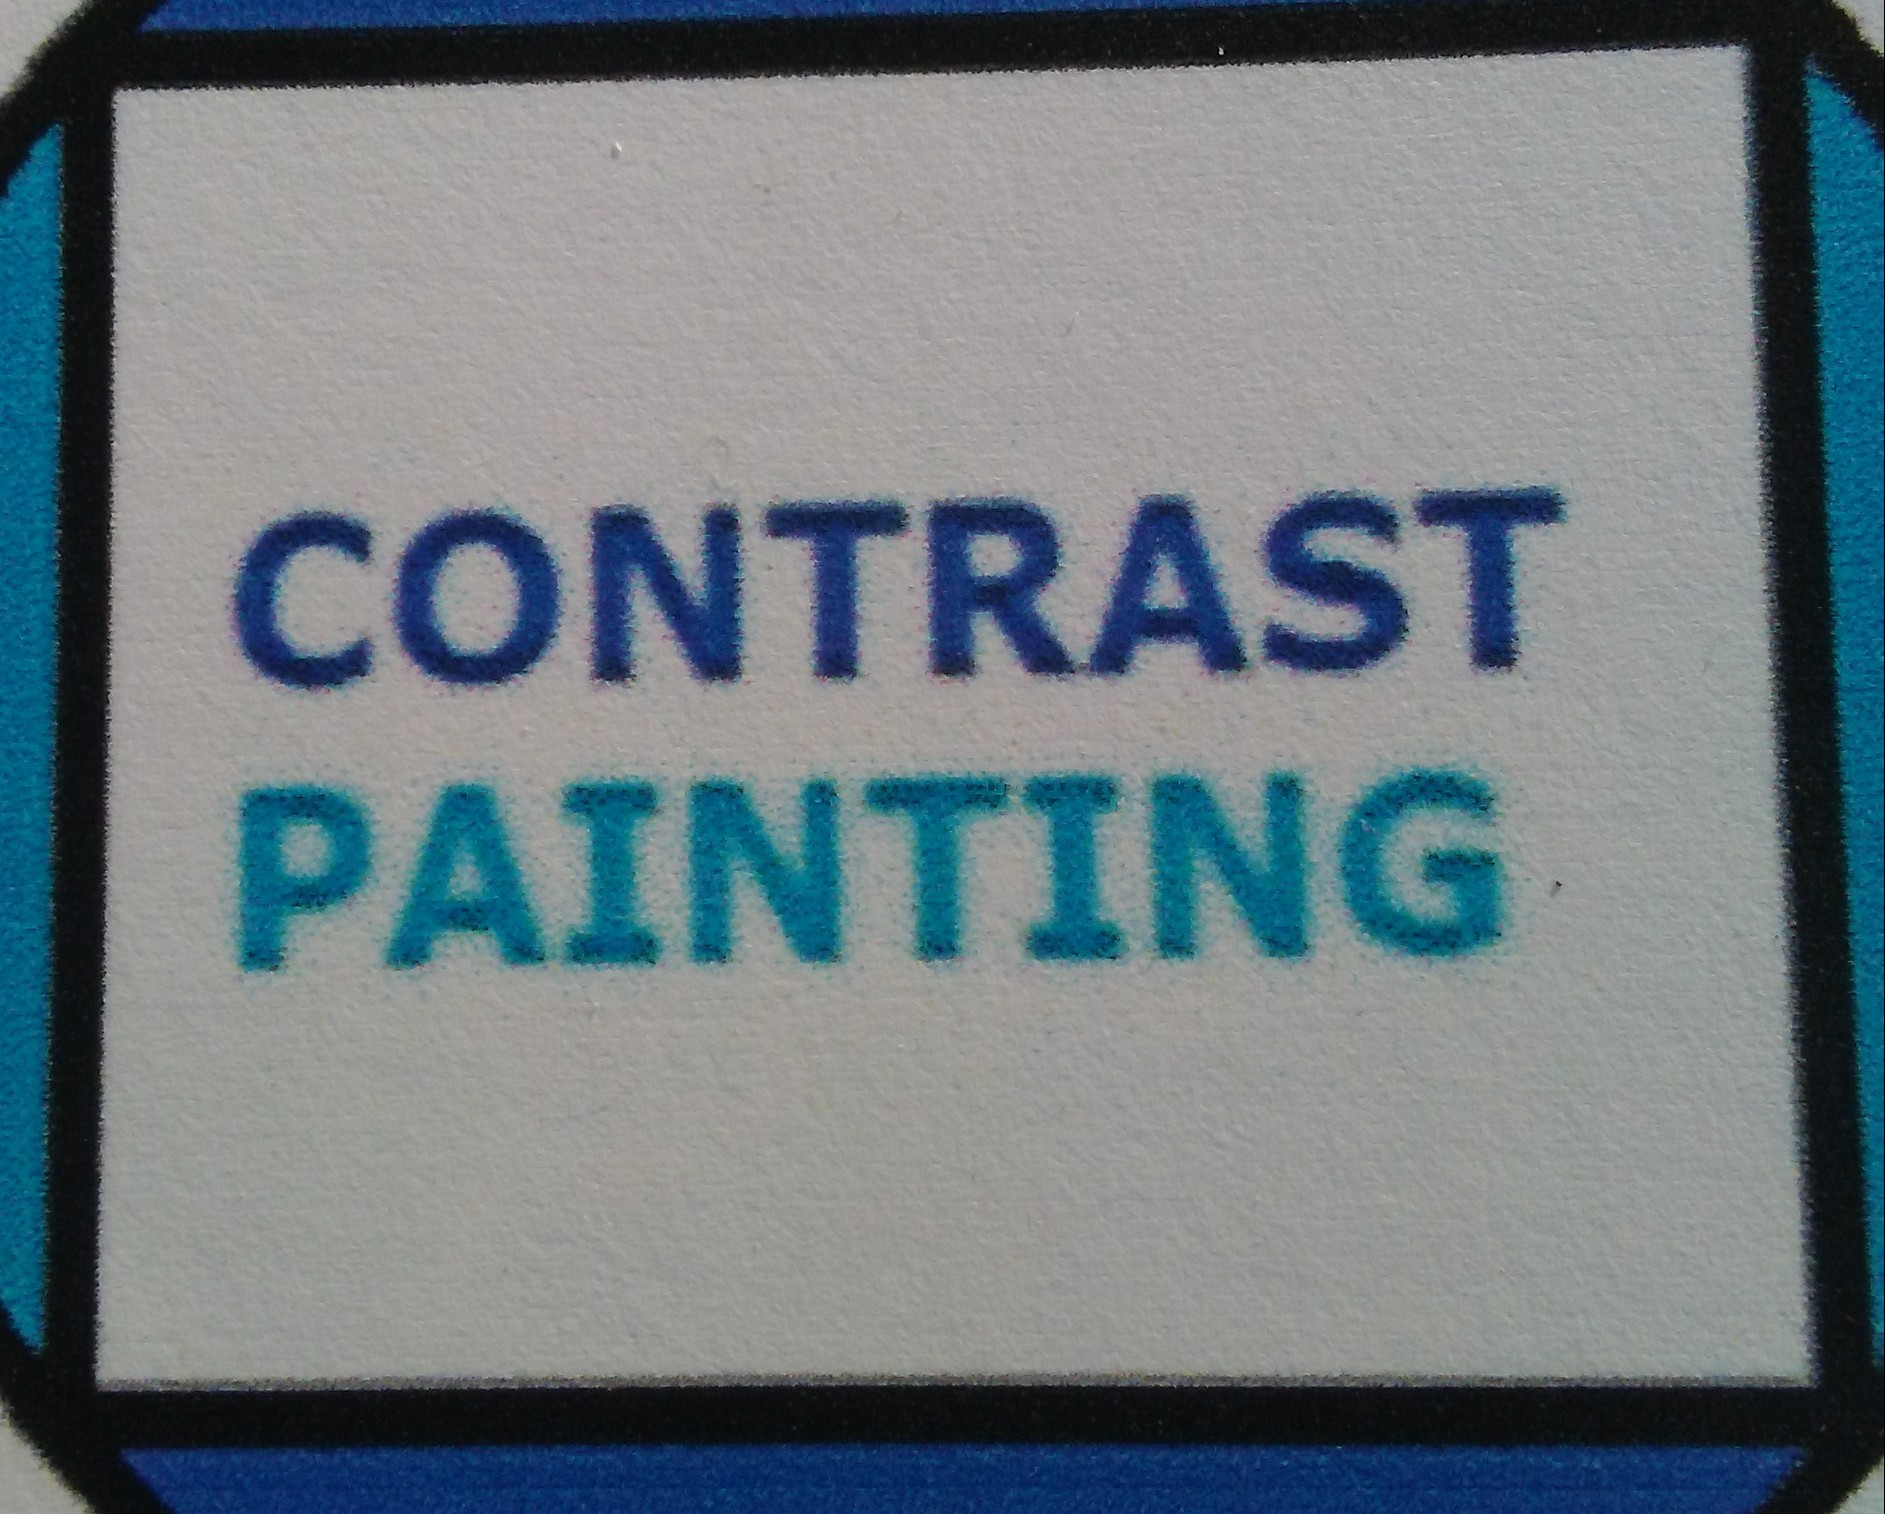 Contrast Painting & Drywall Logo